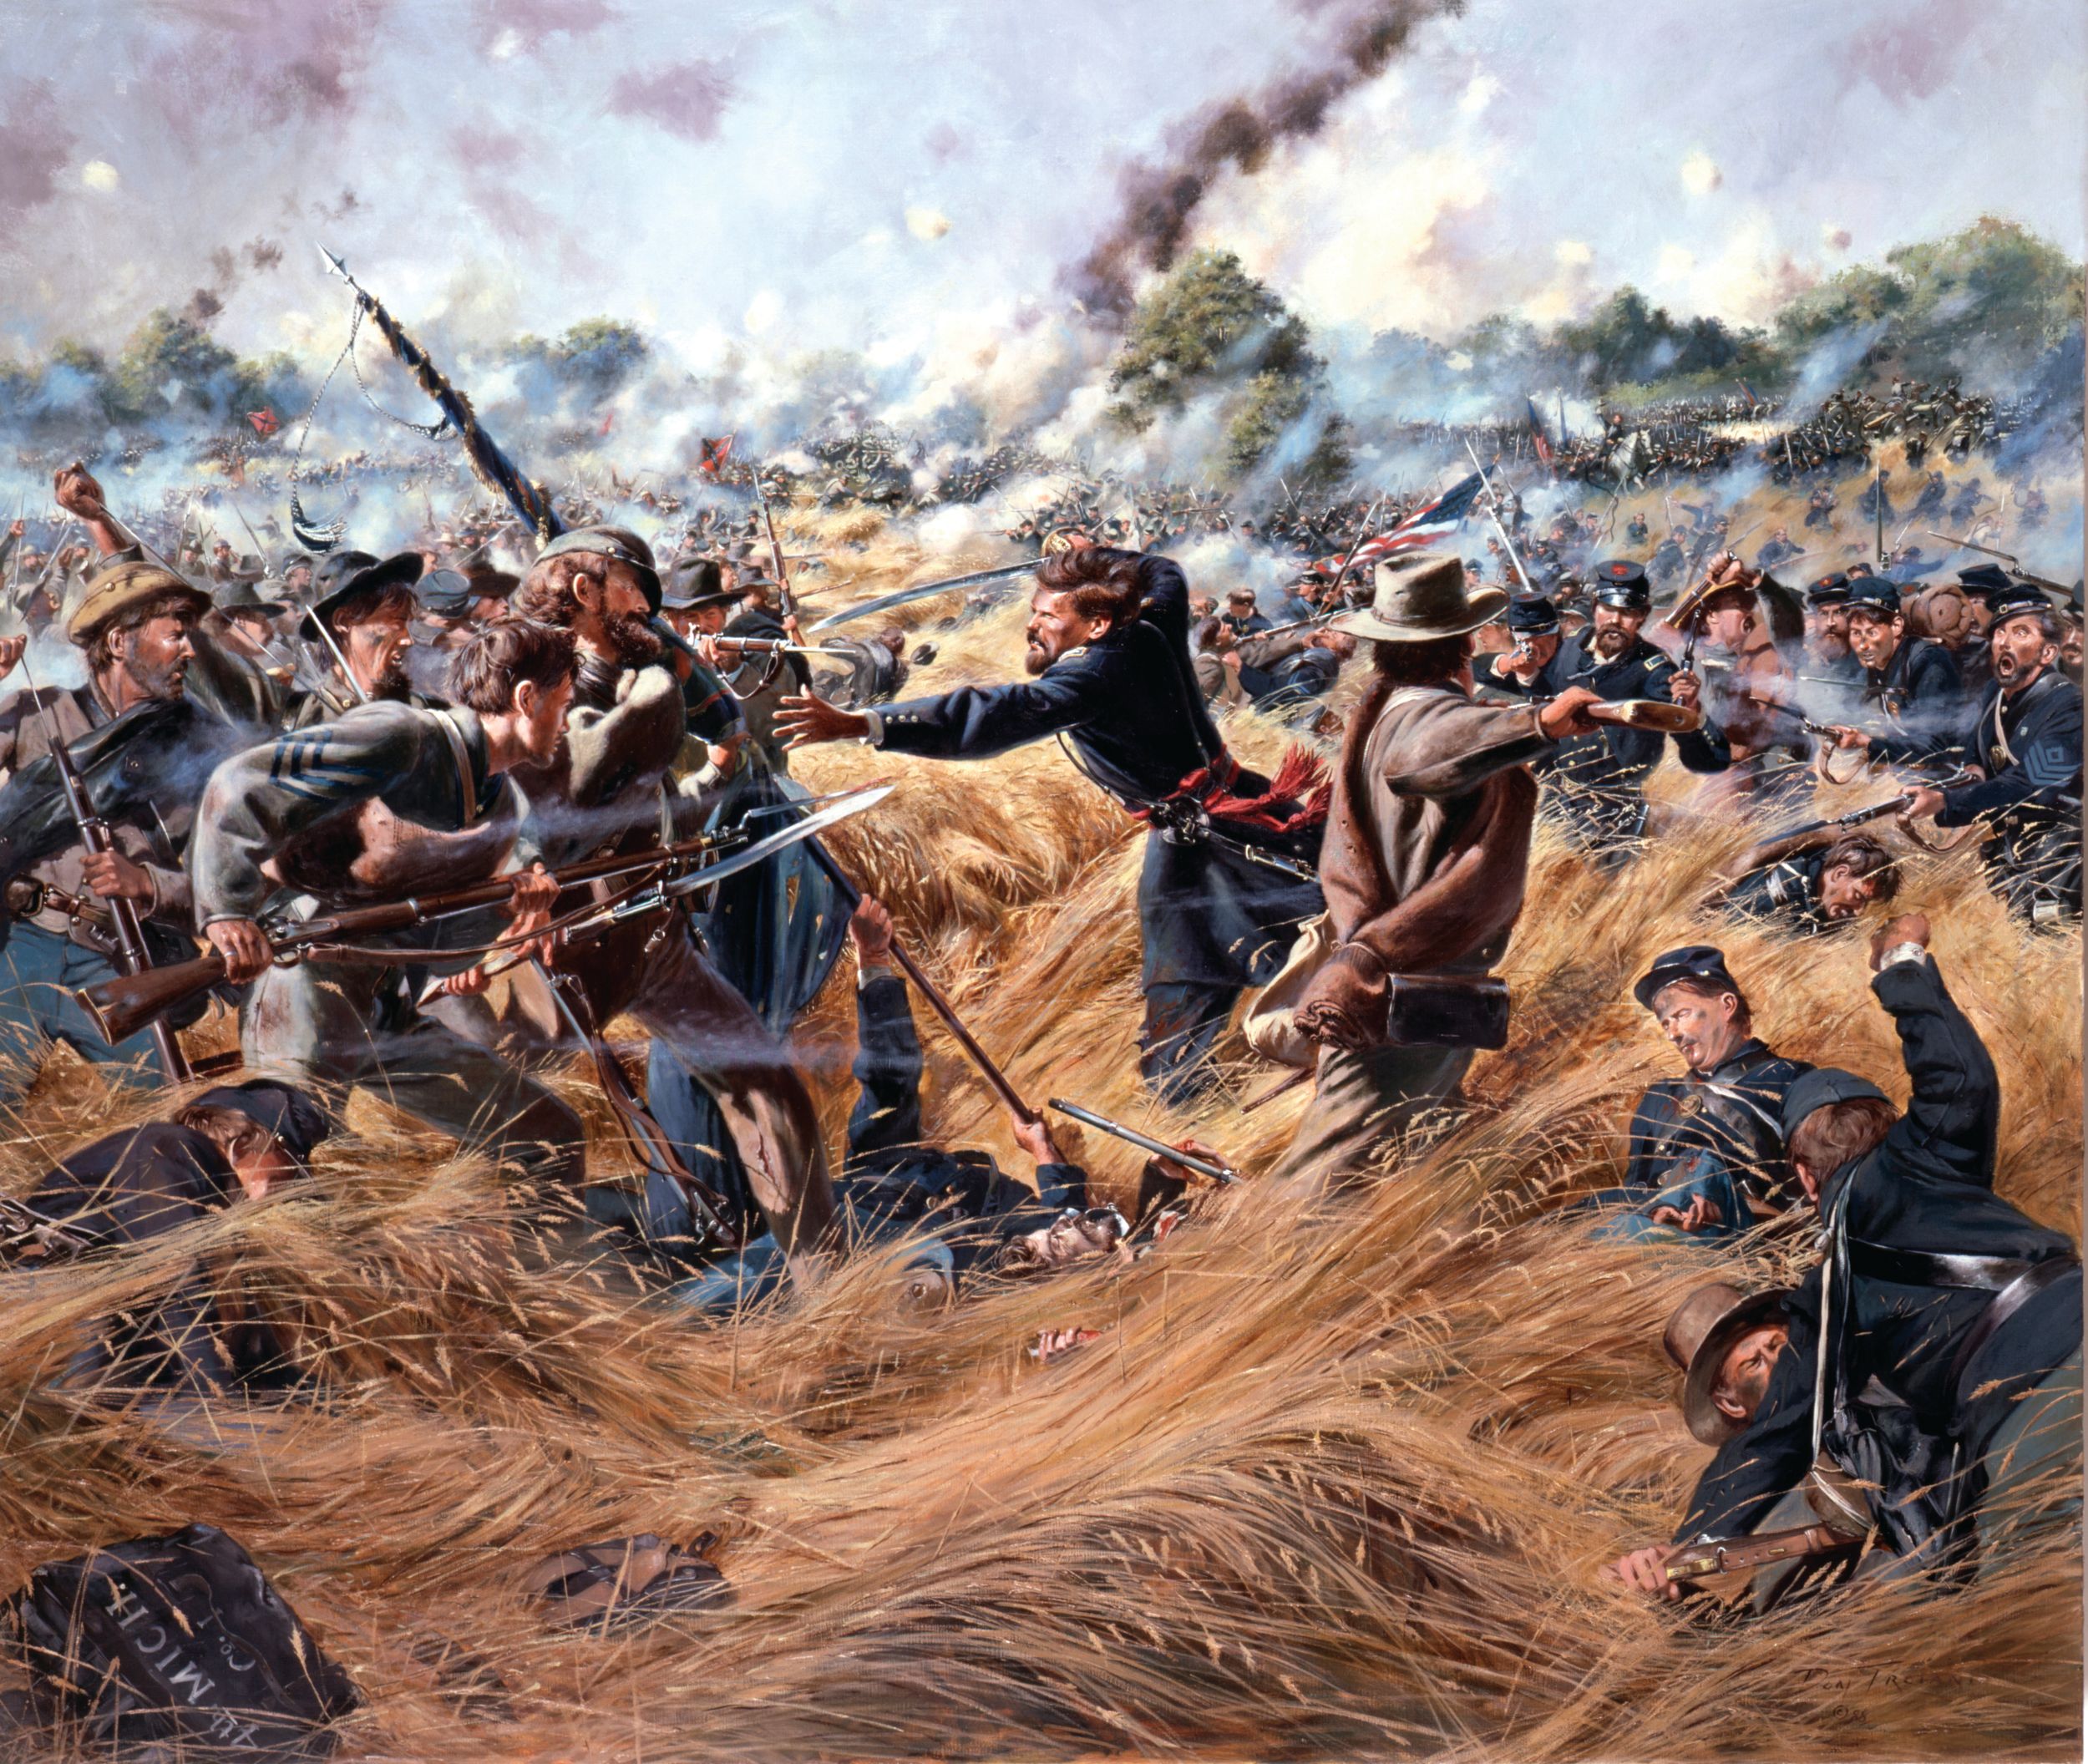 Colonel Harrison Jeffords retakes the regimental colors of the 4th Michigan Infantry during hand-to-hand combat in the Wheatfield at Gettysburg, July 2, 1863. Painting by Don Troiani.